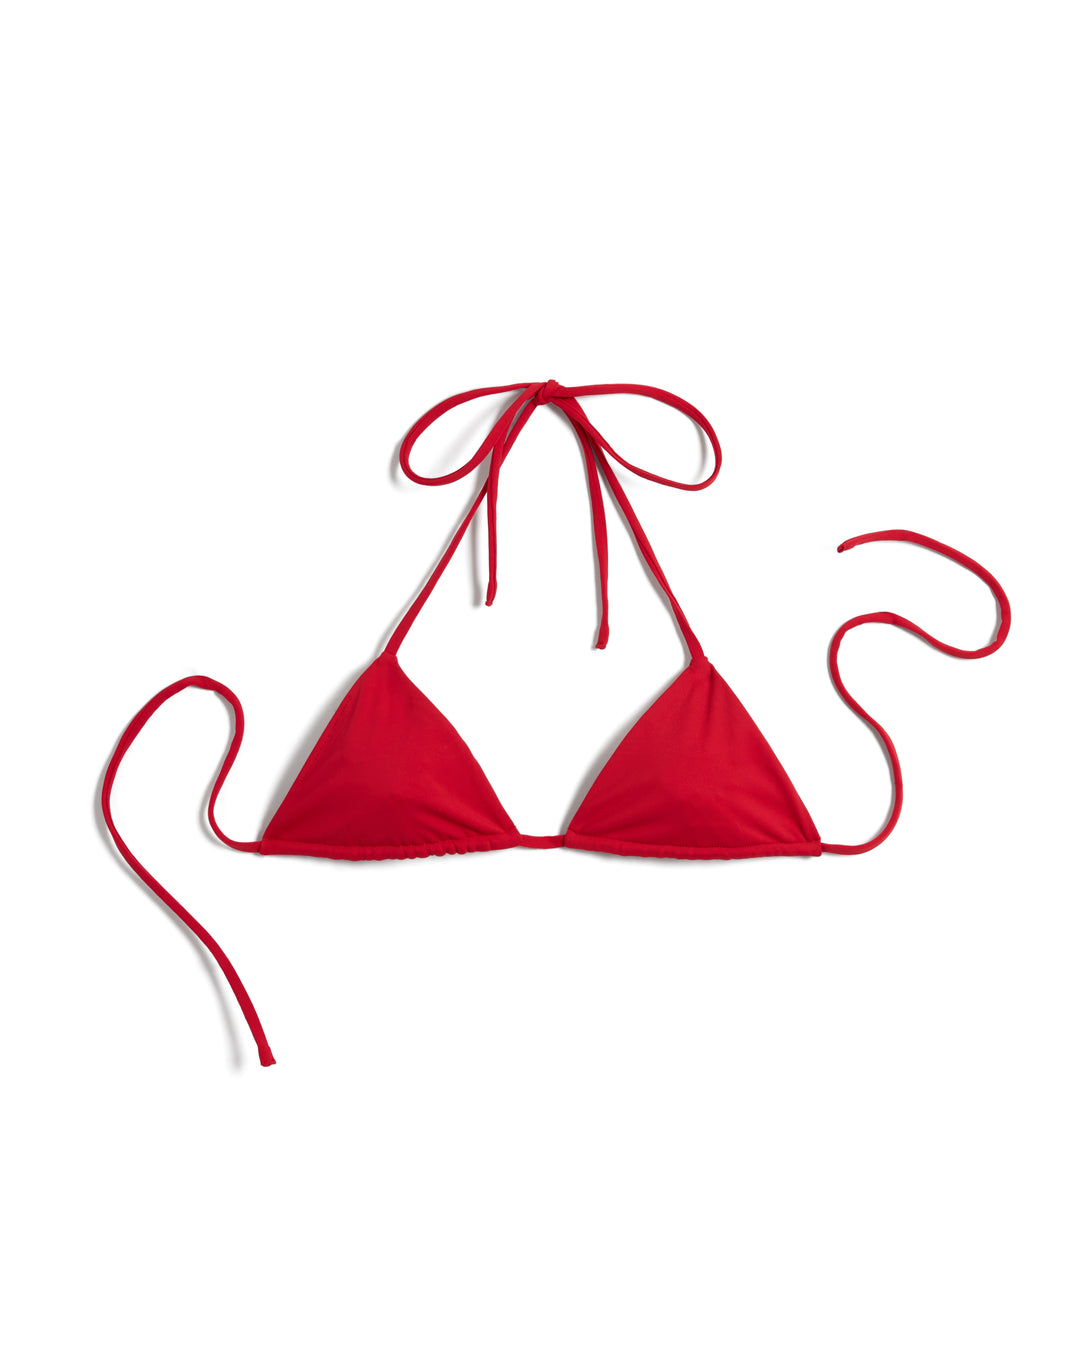 The Hierro Top - Pico by Dandy Del Mar is a red sliding triangle bikini top with halter and back ties, perfect for Summer Leisure Chic style. Displayed on a white background.